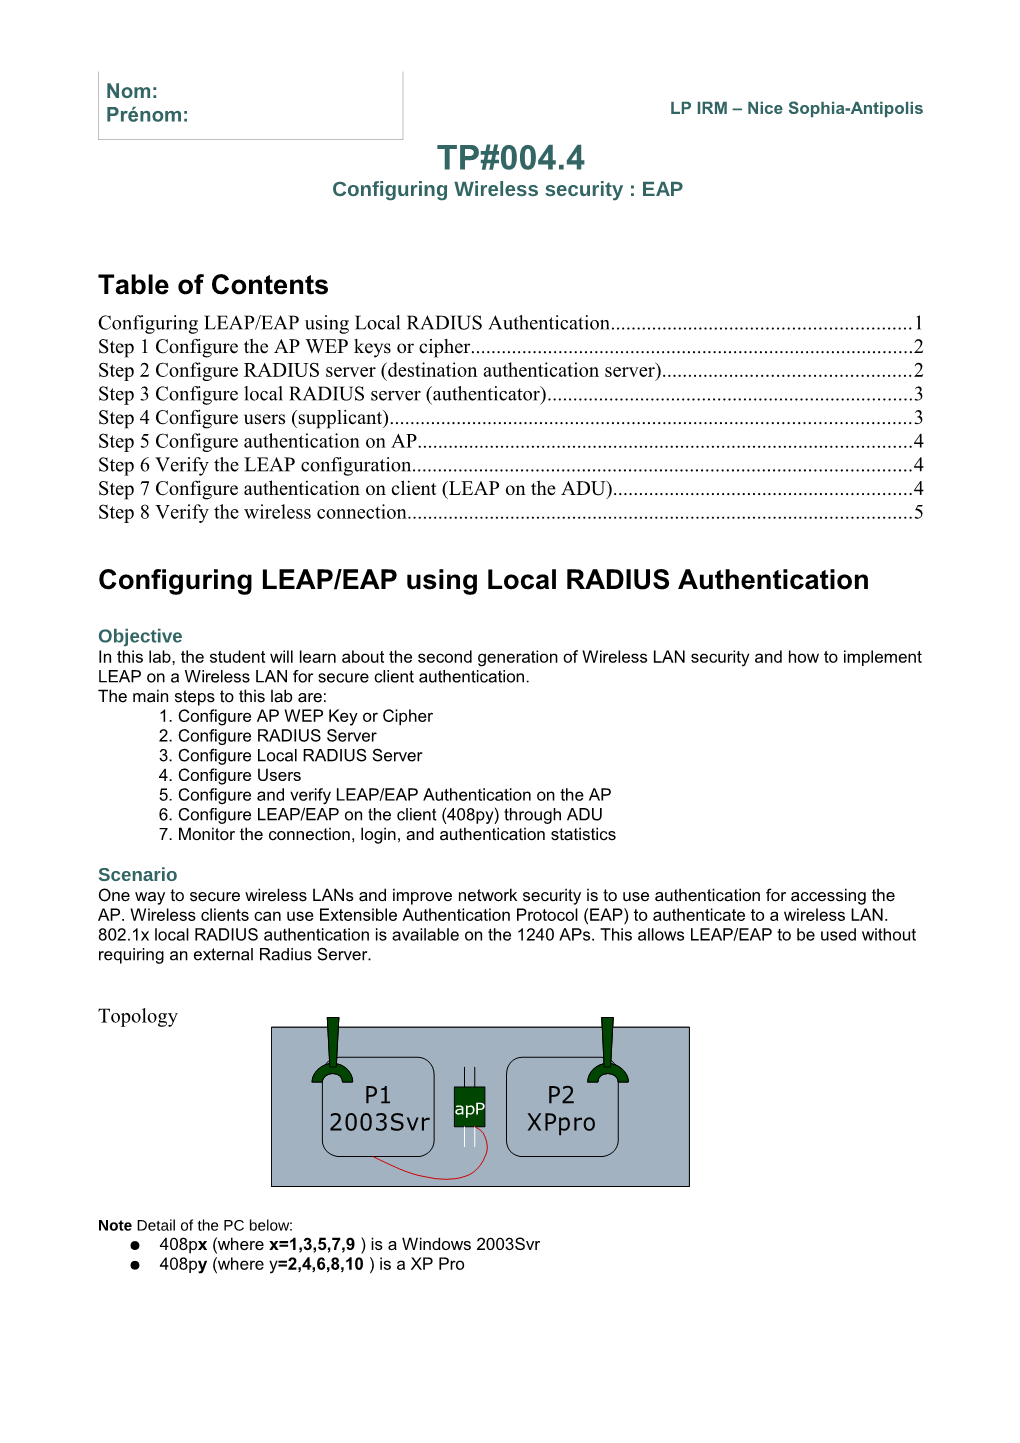 Configuring Wireless Security : EAP